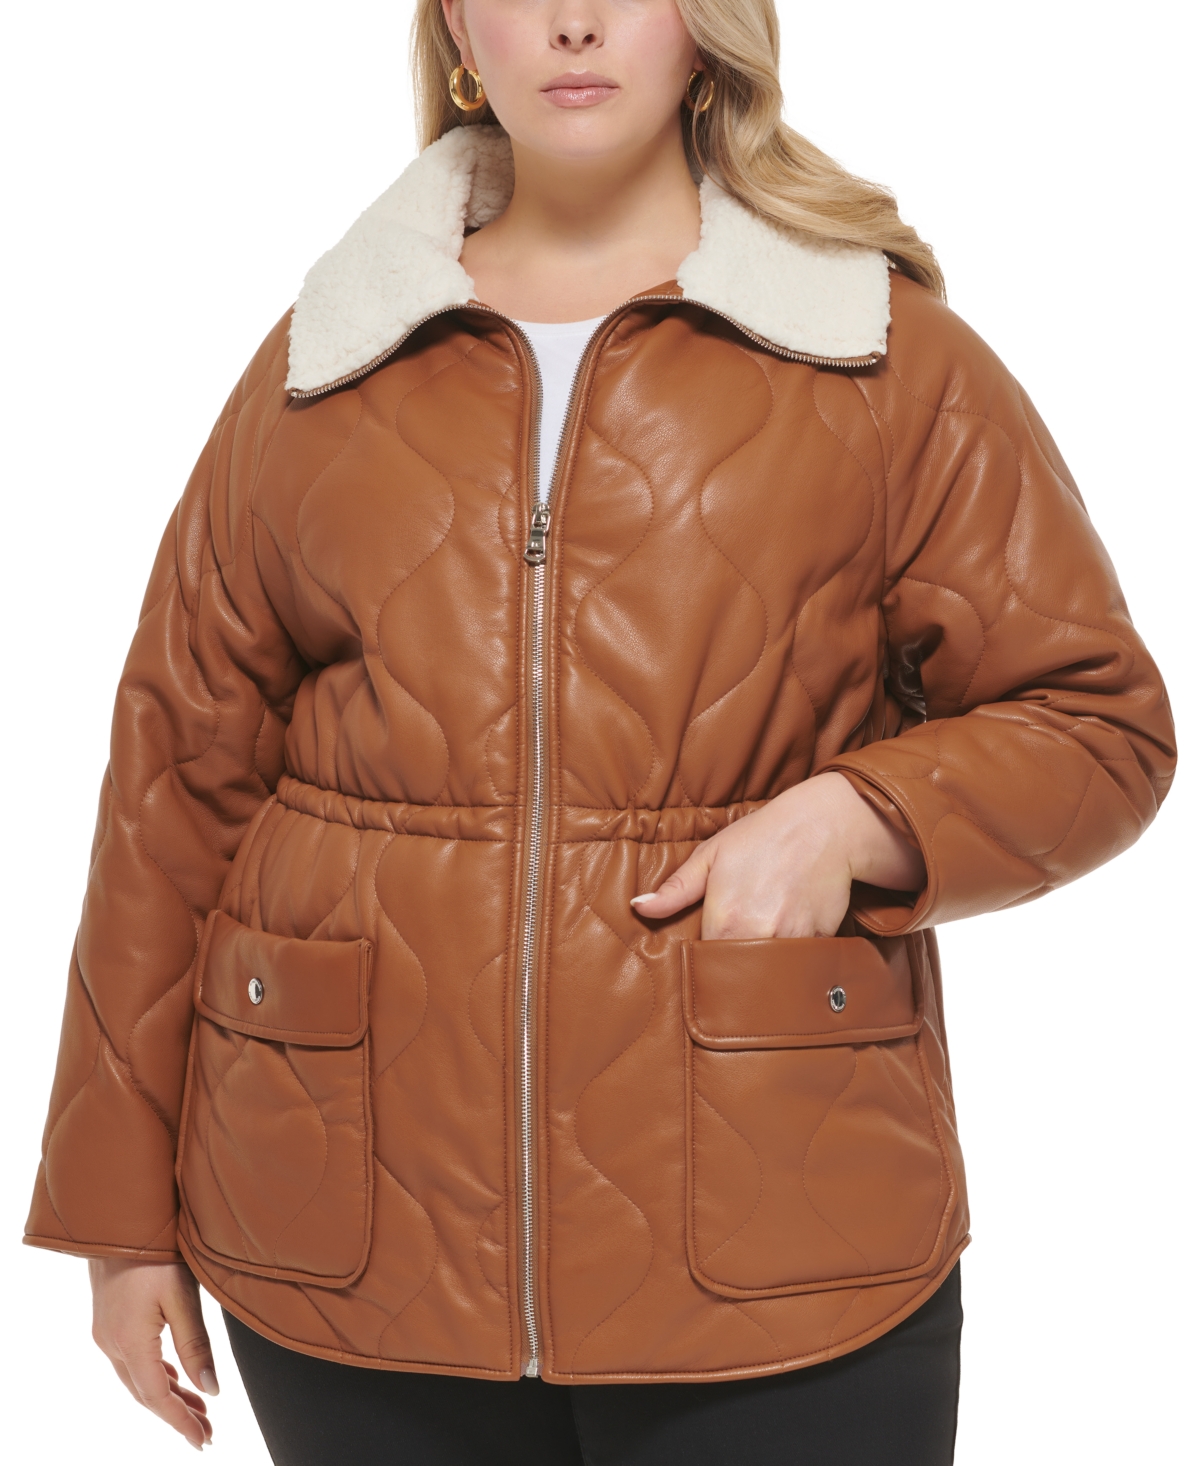 Kenneth Cole Women's Plus Size Quilted Faux-Leather Jacket